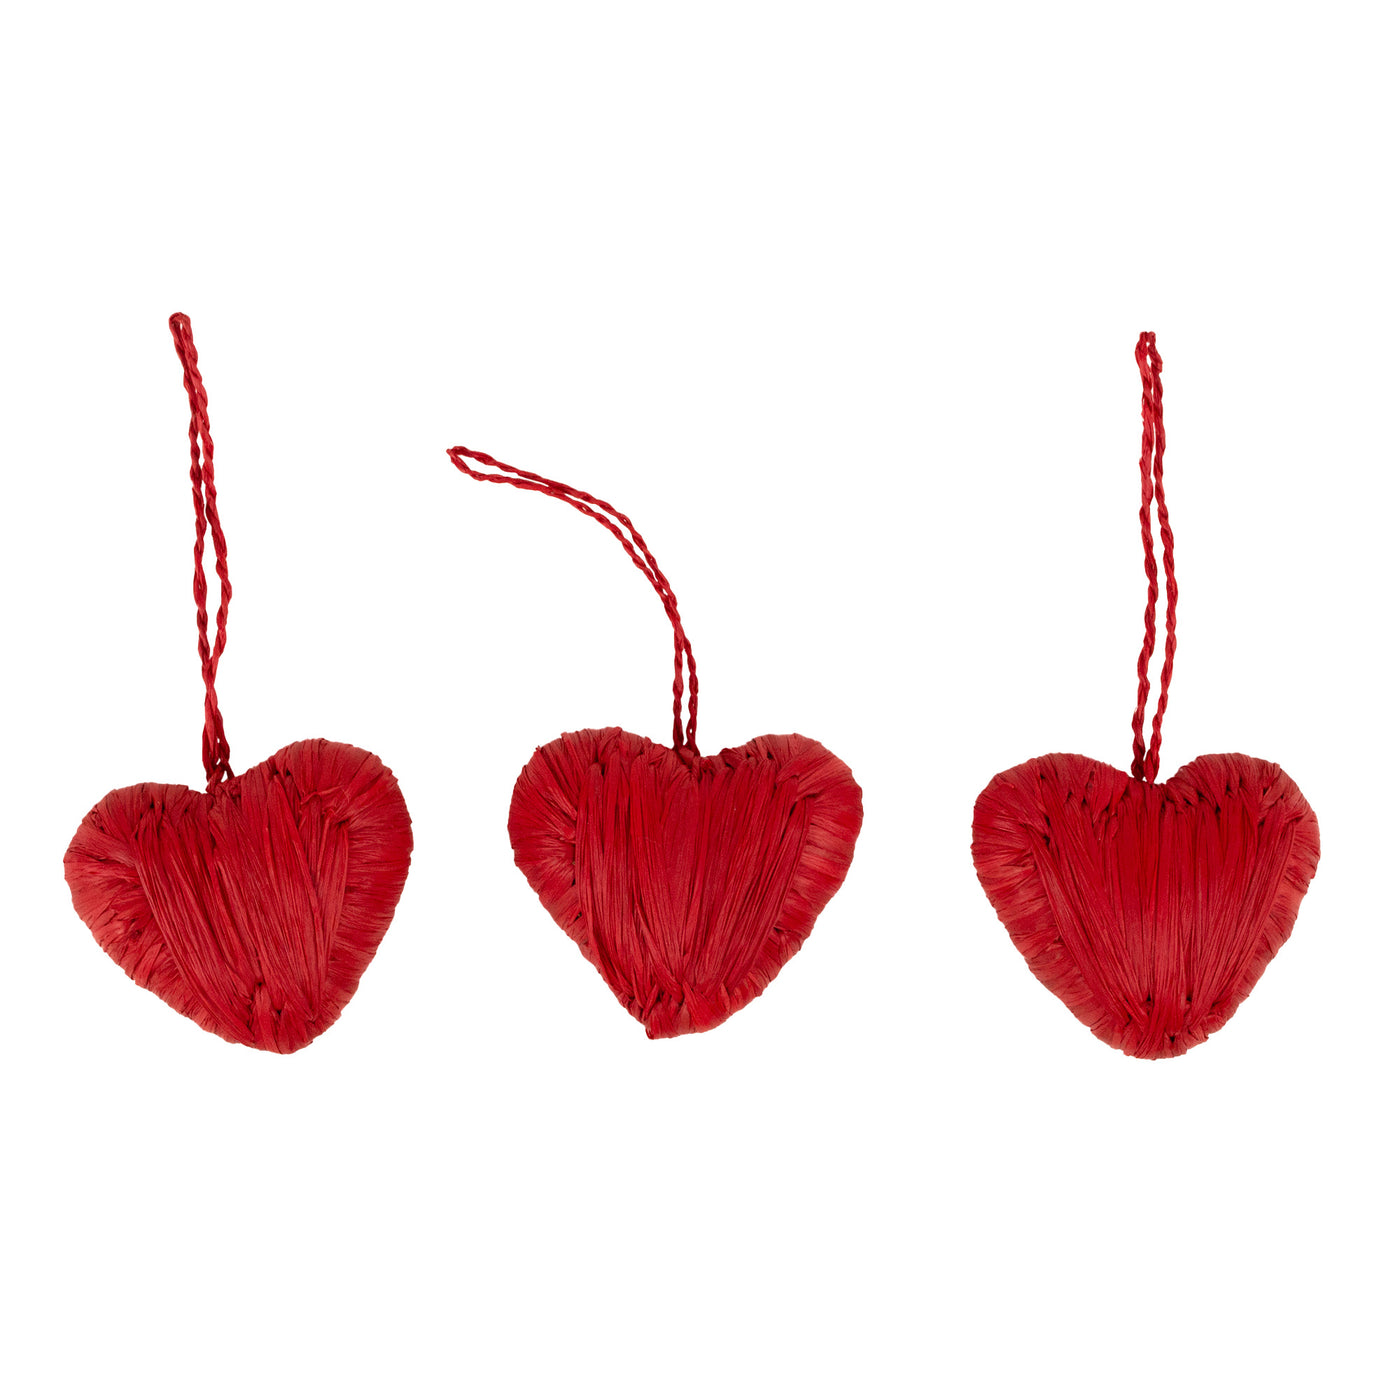 Red Heart Ornaments, Set of 3